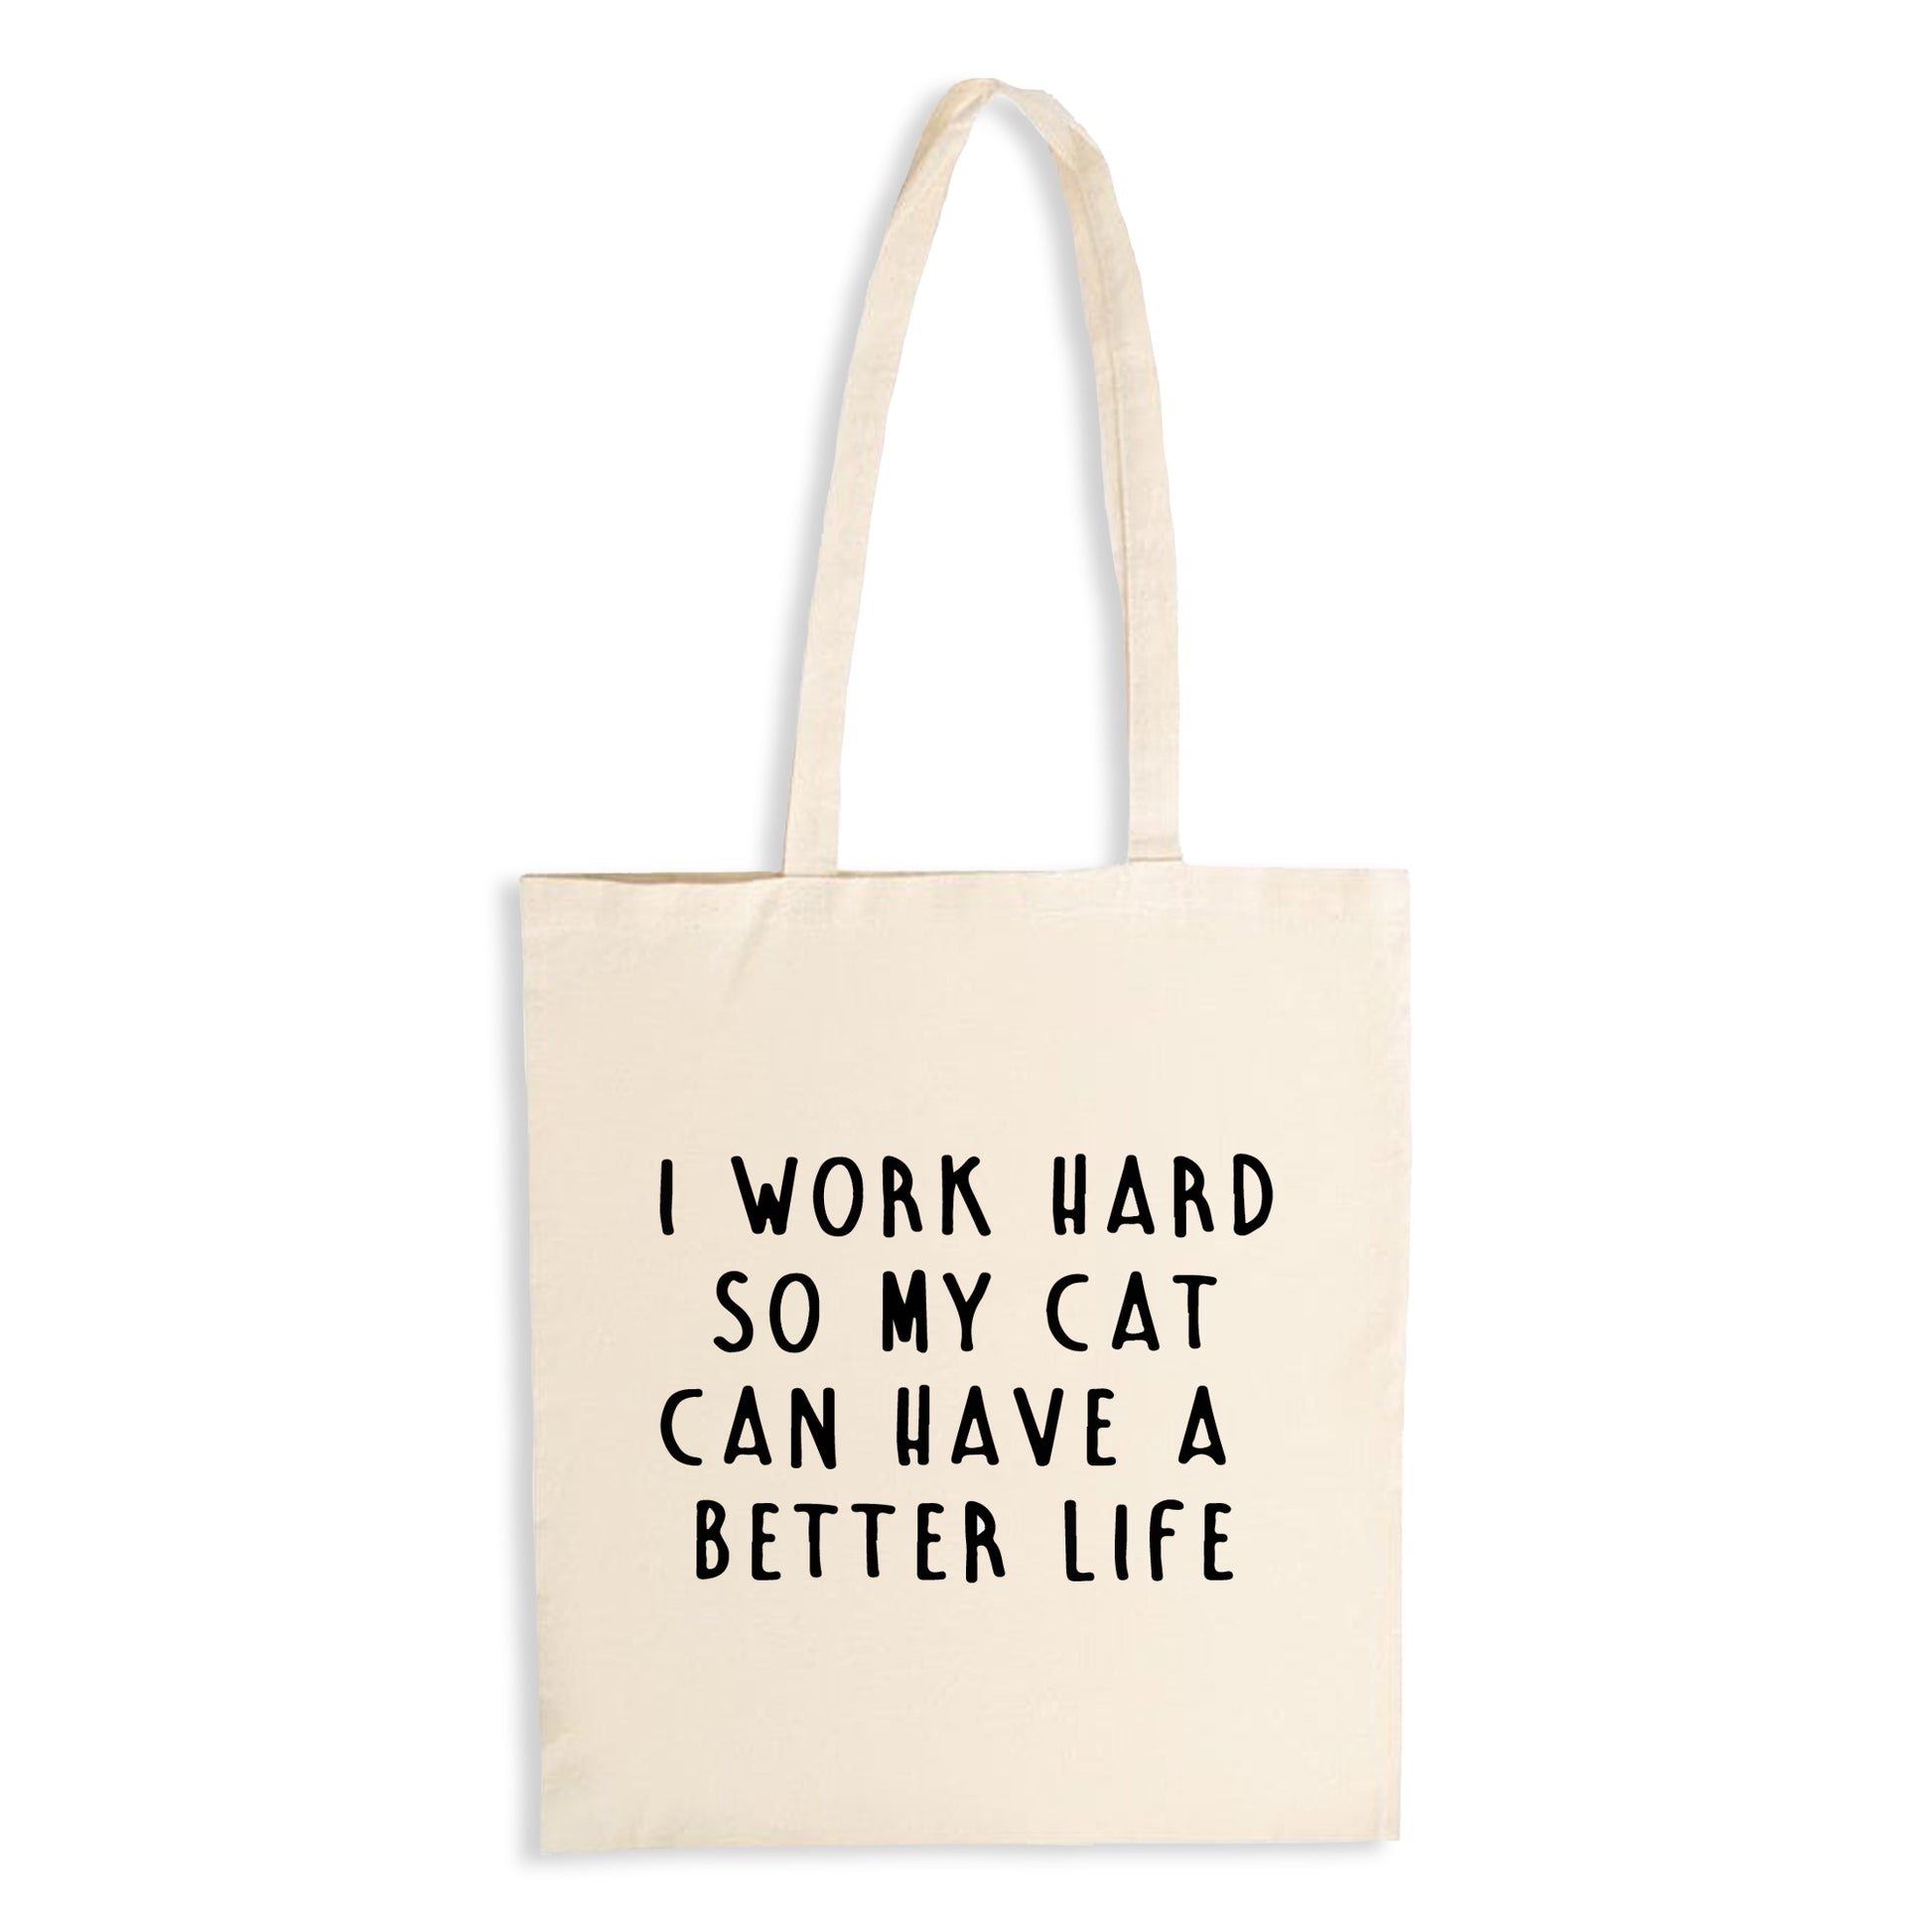 I Work Hard So My Cat Can Have a Better Life - Natural Tote Bag